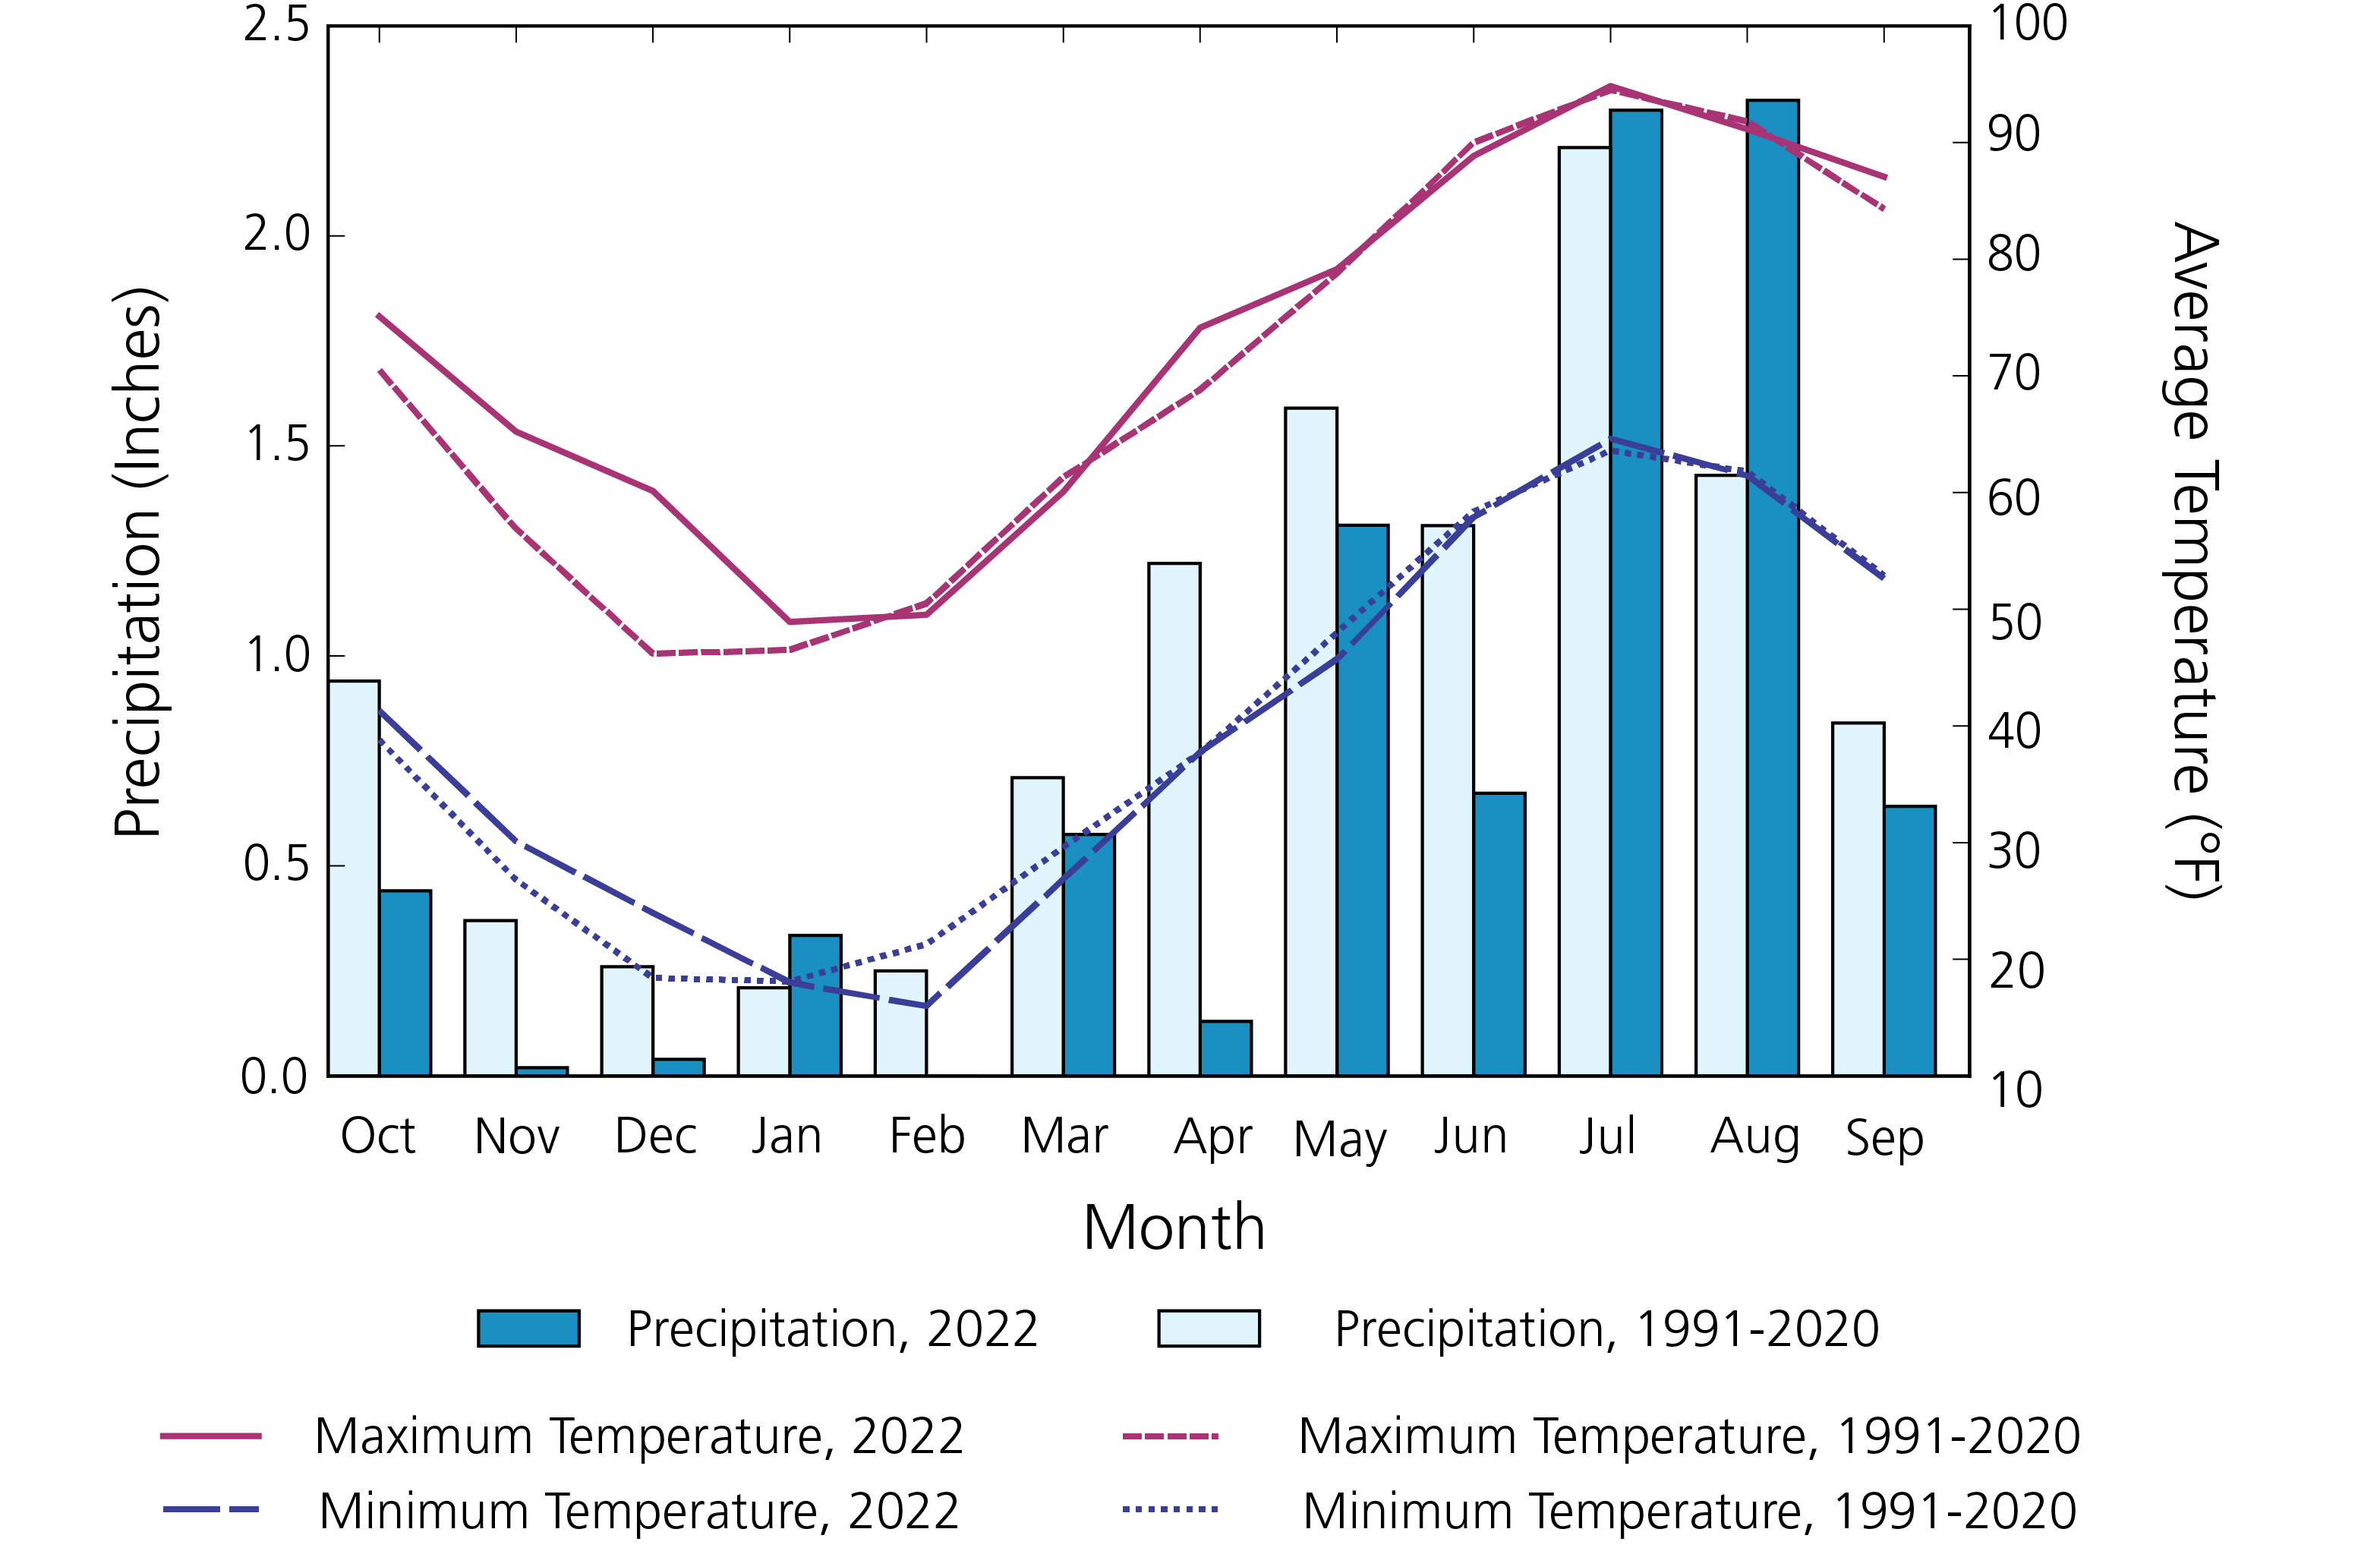 Temperatures near normal except fall and winter; precipitation below normal in 9 of 12 months.